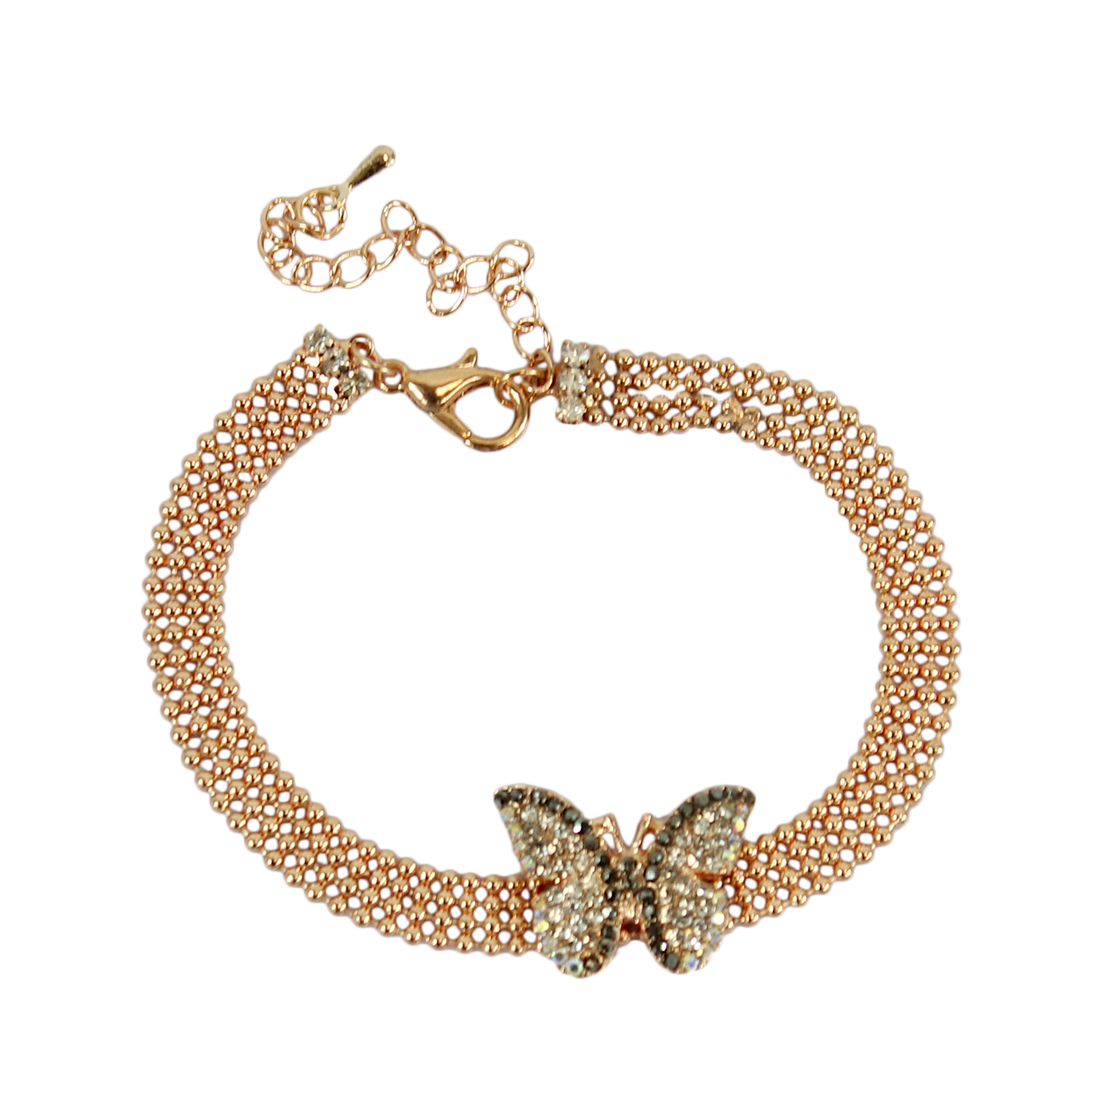 Three line bracelet with a pretty butterfly